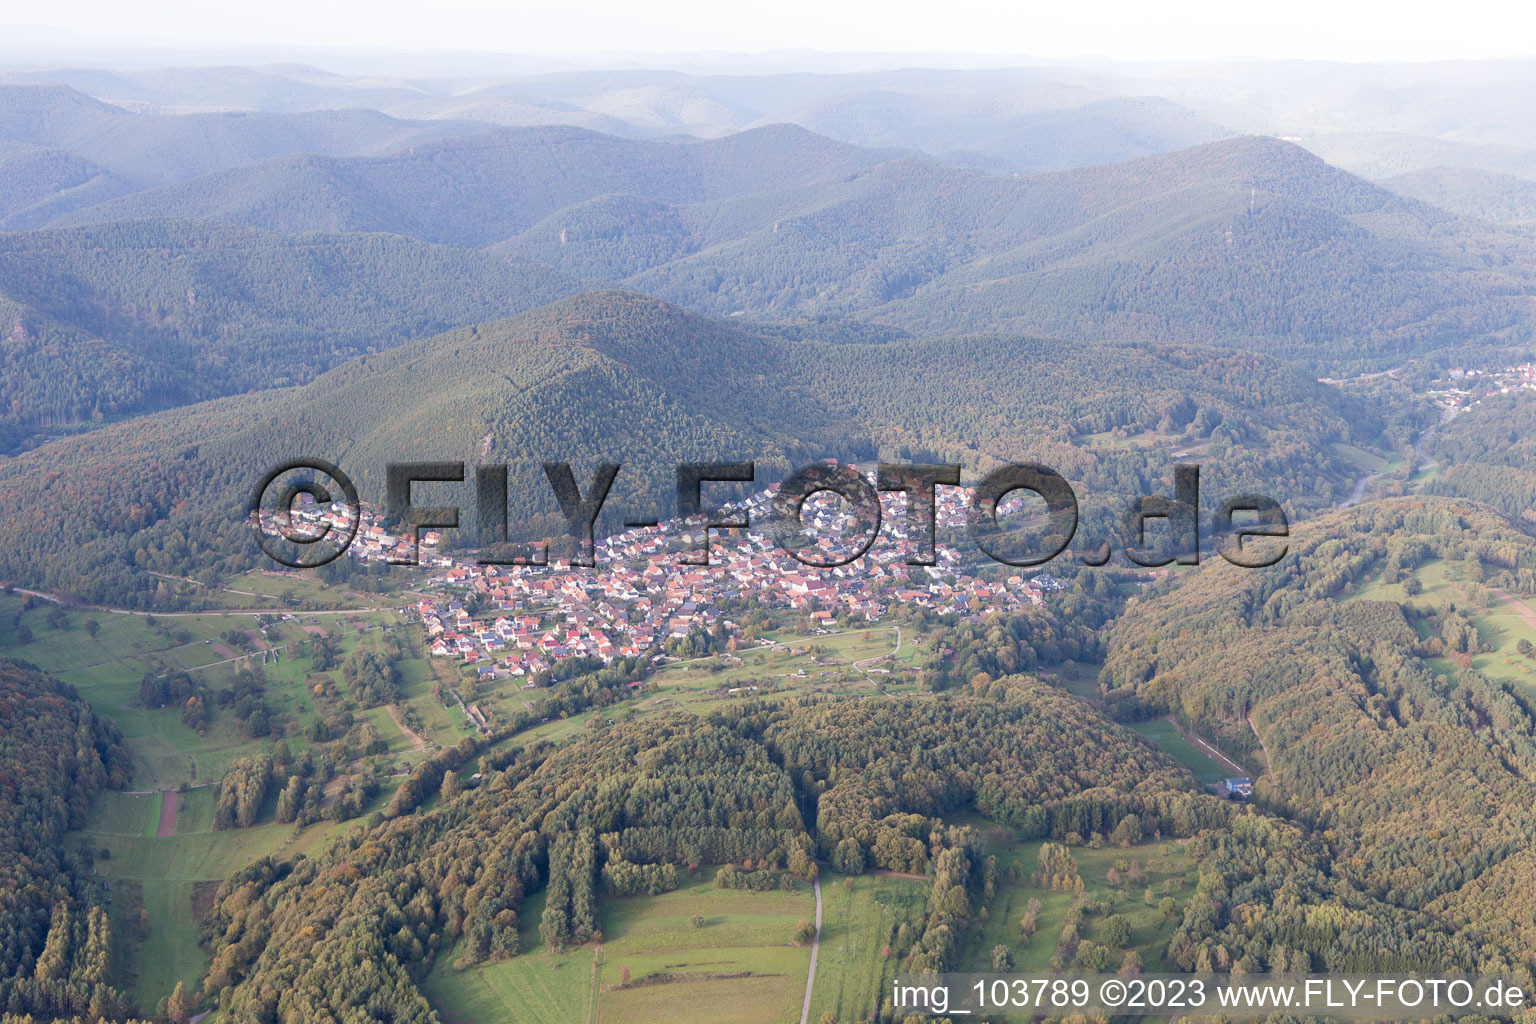 Drone image of Wernersberg in the state Rhineland-Palatinate, Germany